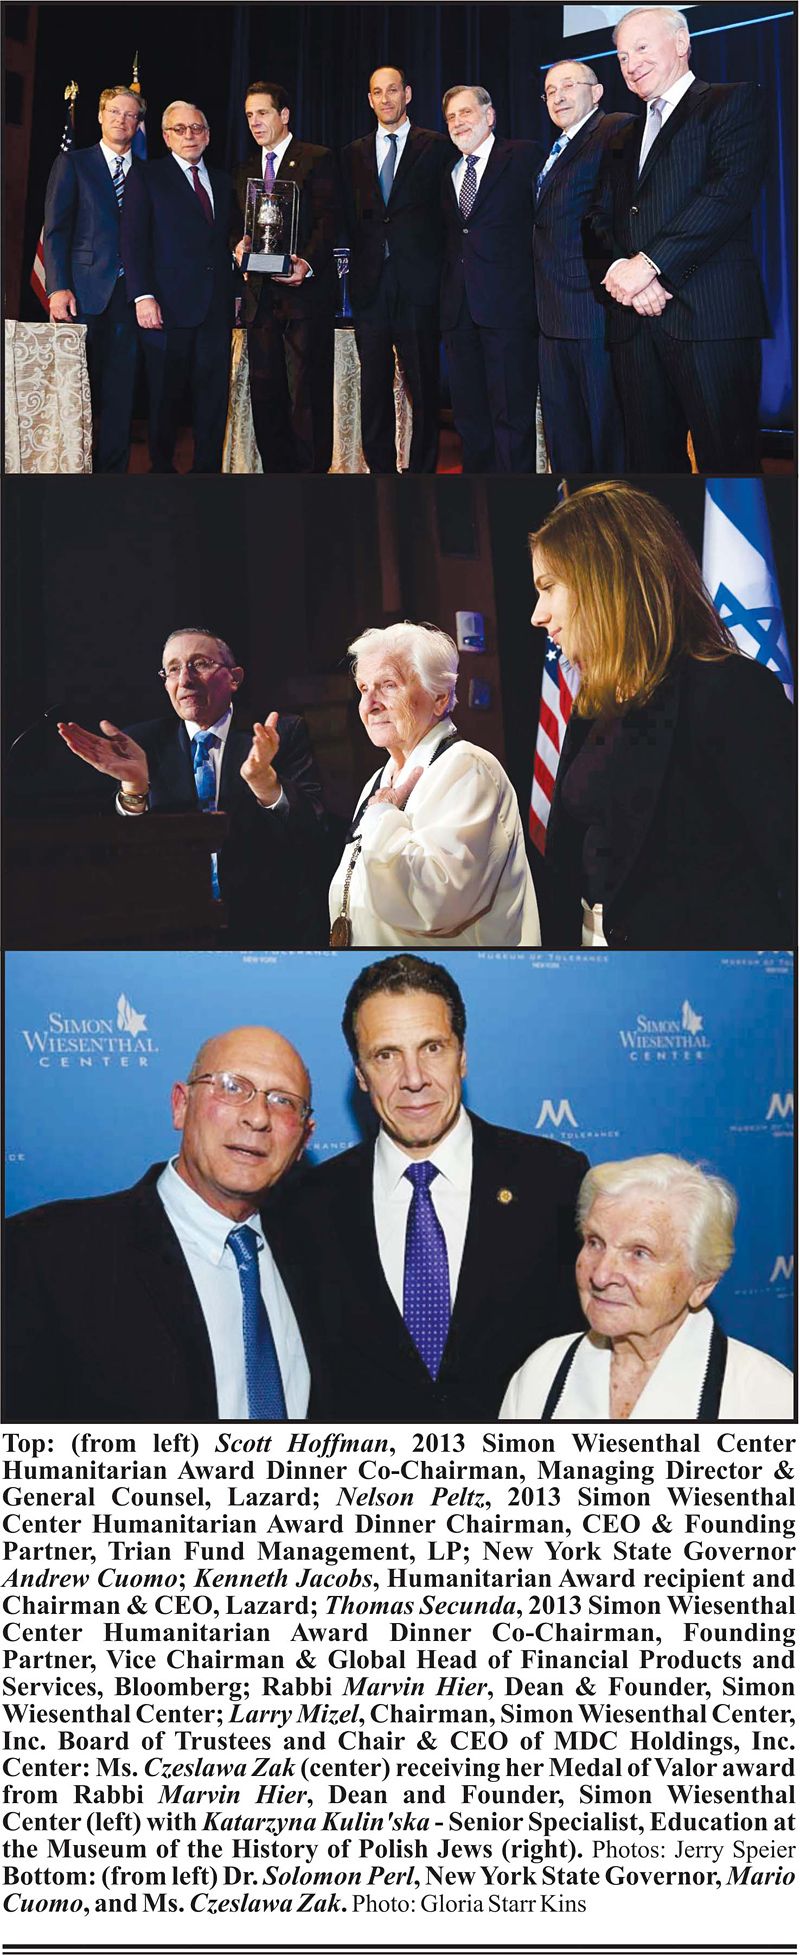 Simon Wiesenthal Center Honors NYS Gov. Mario Cuomo, Kenneth Jacobs, Czeslawa Zak and William Perl